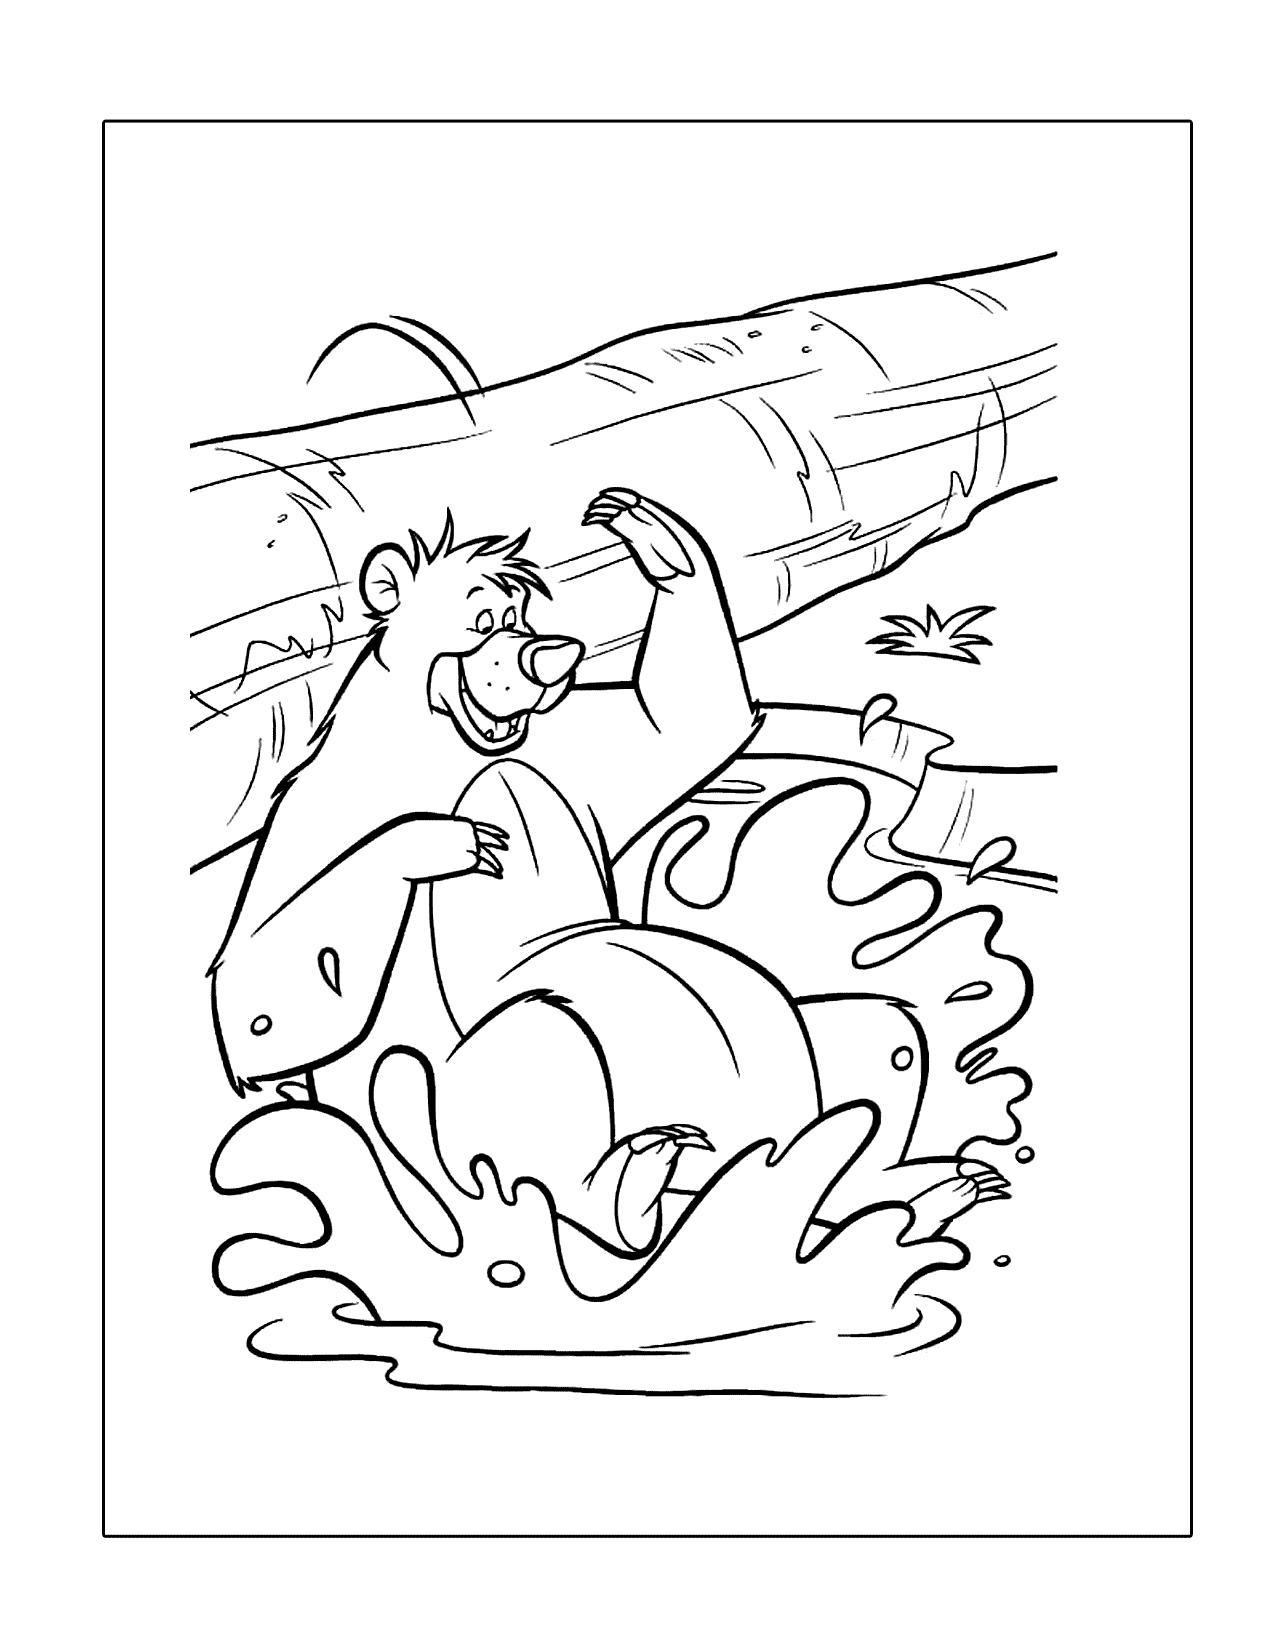 Baloo Splashes Around Jungle Book Coloring Page